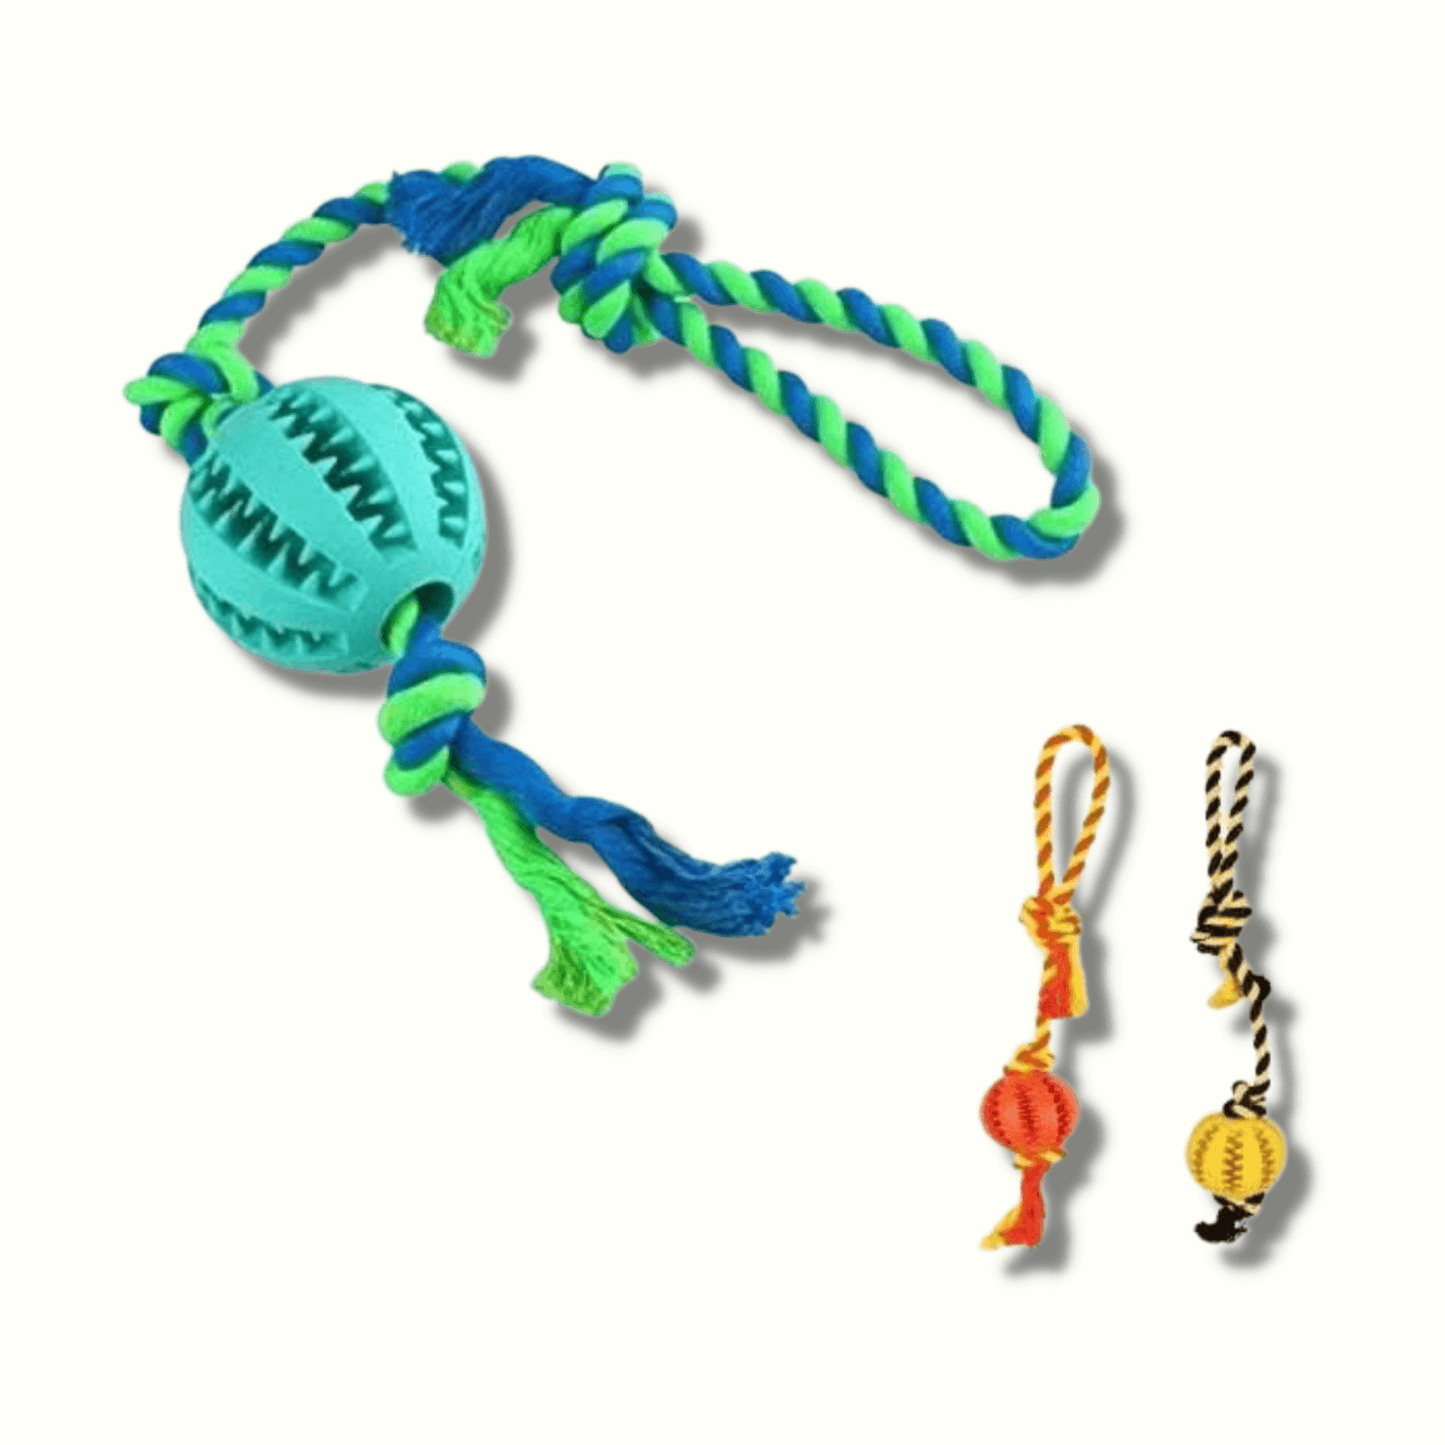  Enrichment dog treat ball with rope